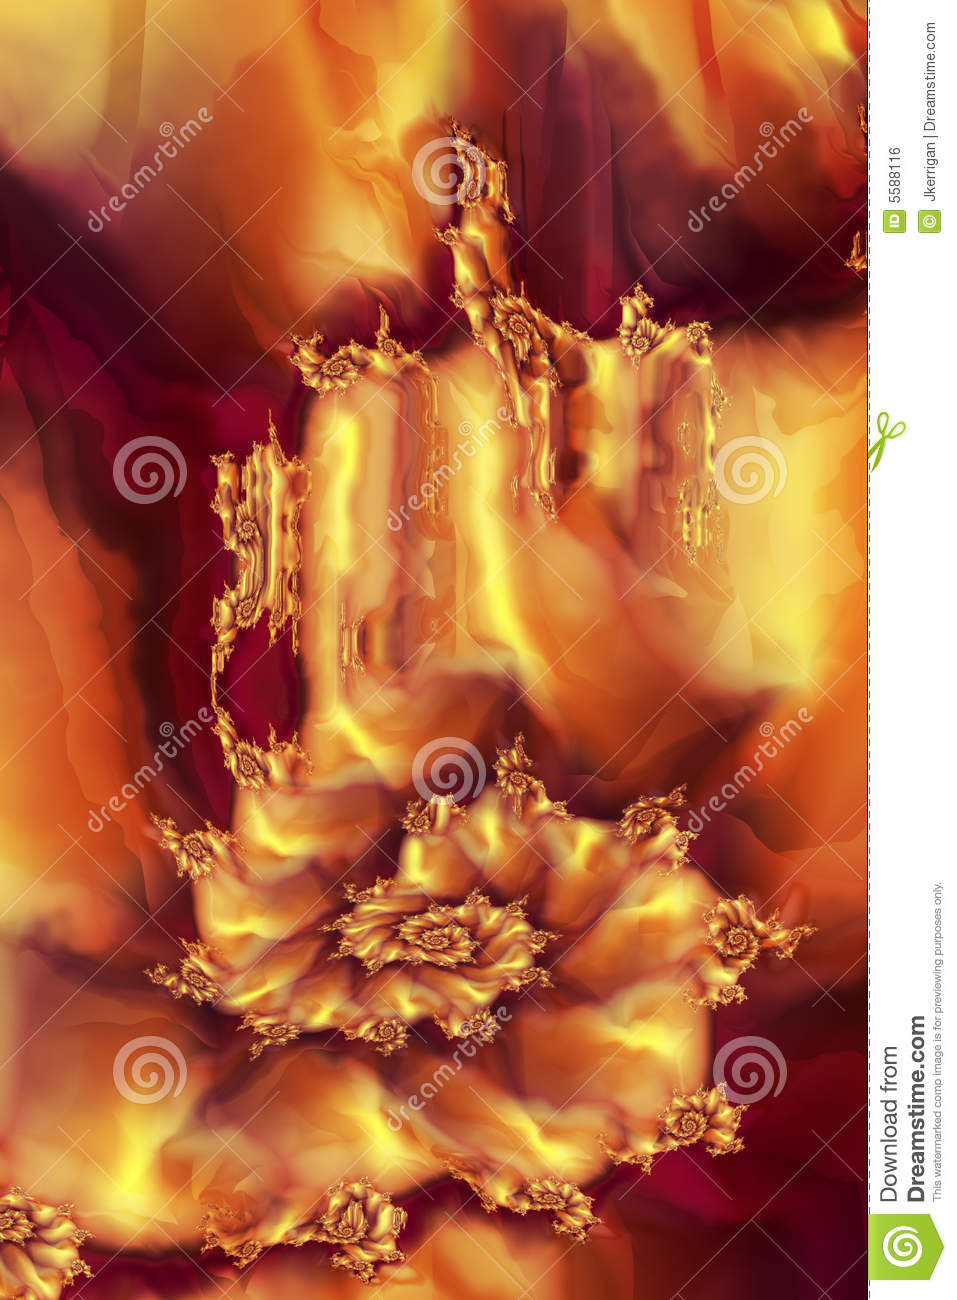 Heavenly Throne Royalty Free Stock Image   Image  5588116